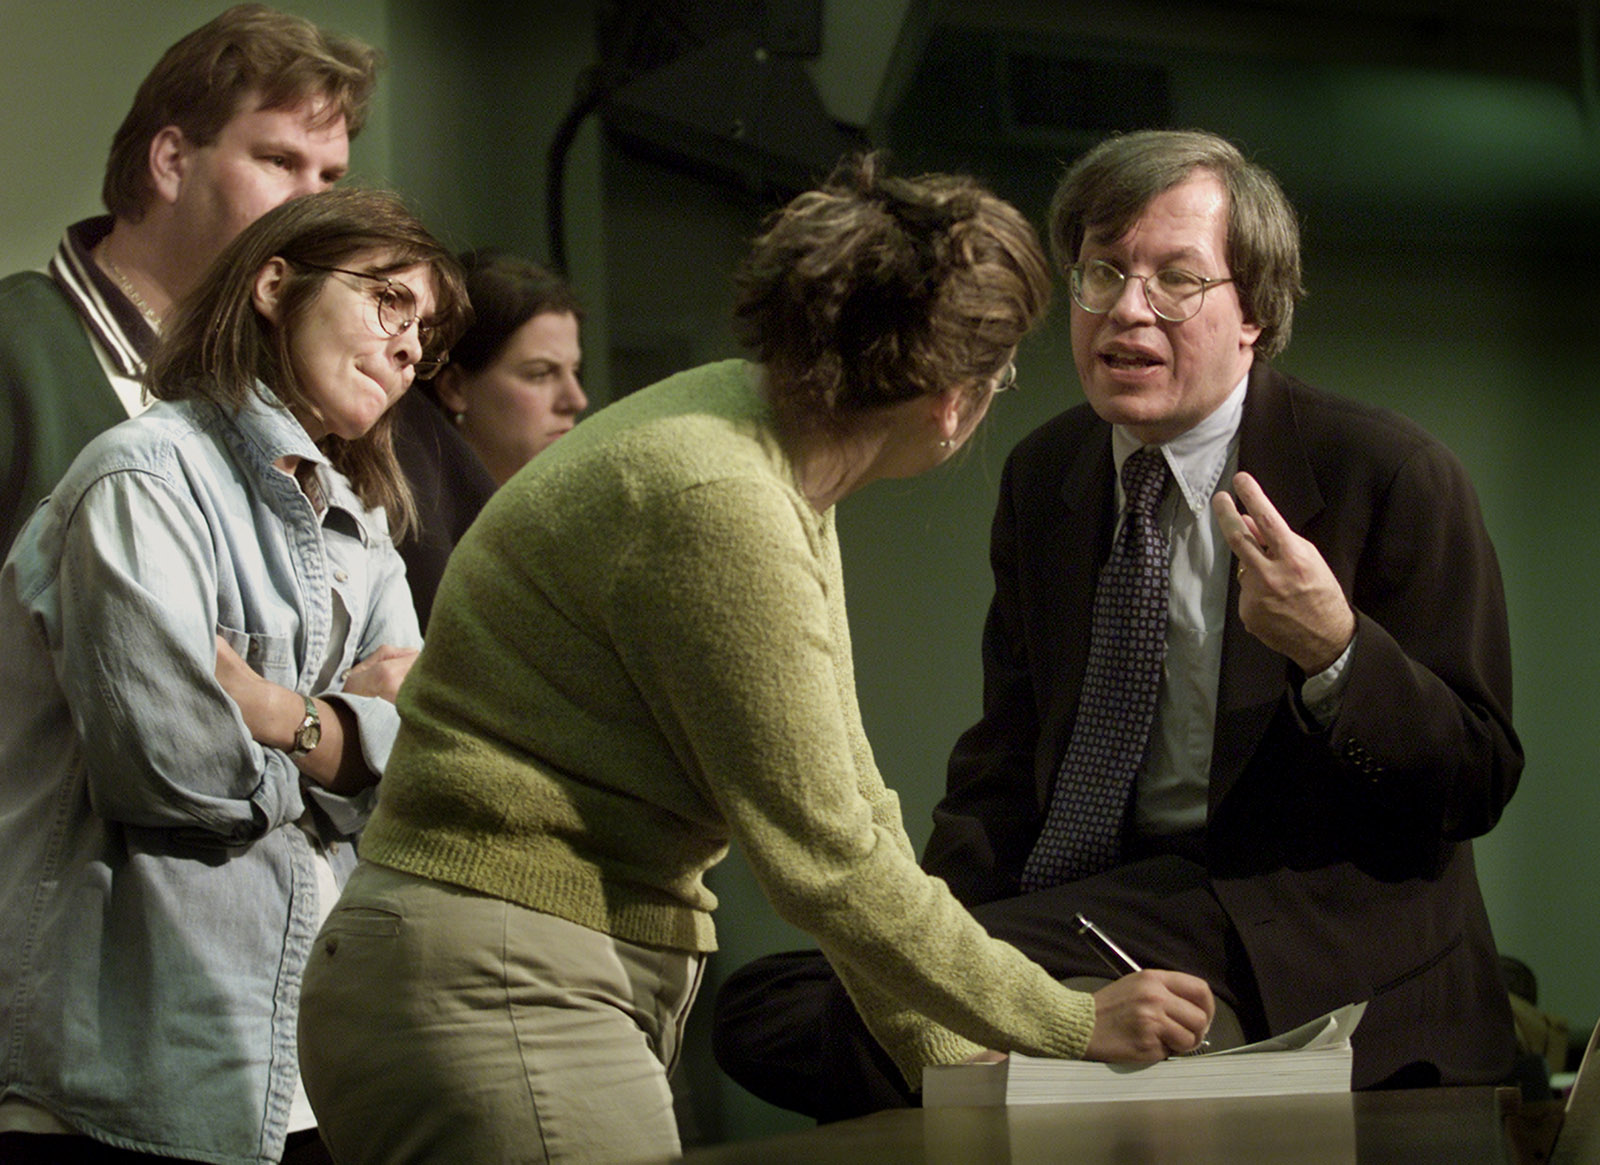 Law professor Erwin Chemerinsky with students during a bar exam review course, Los Angeles, 2001